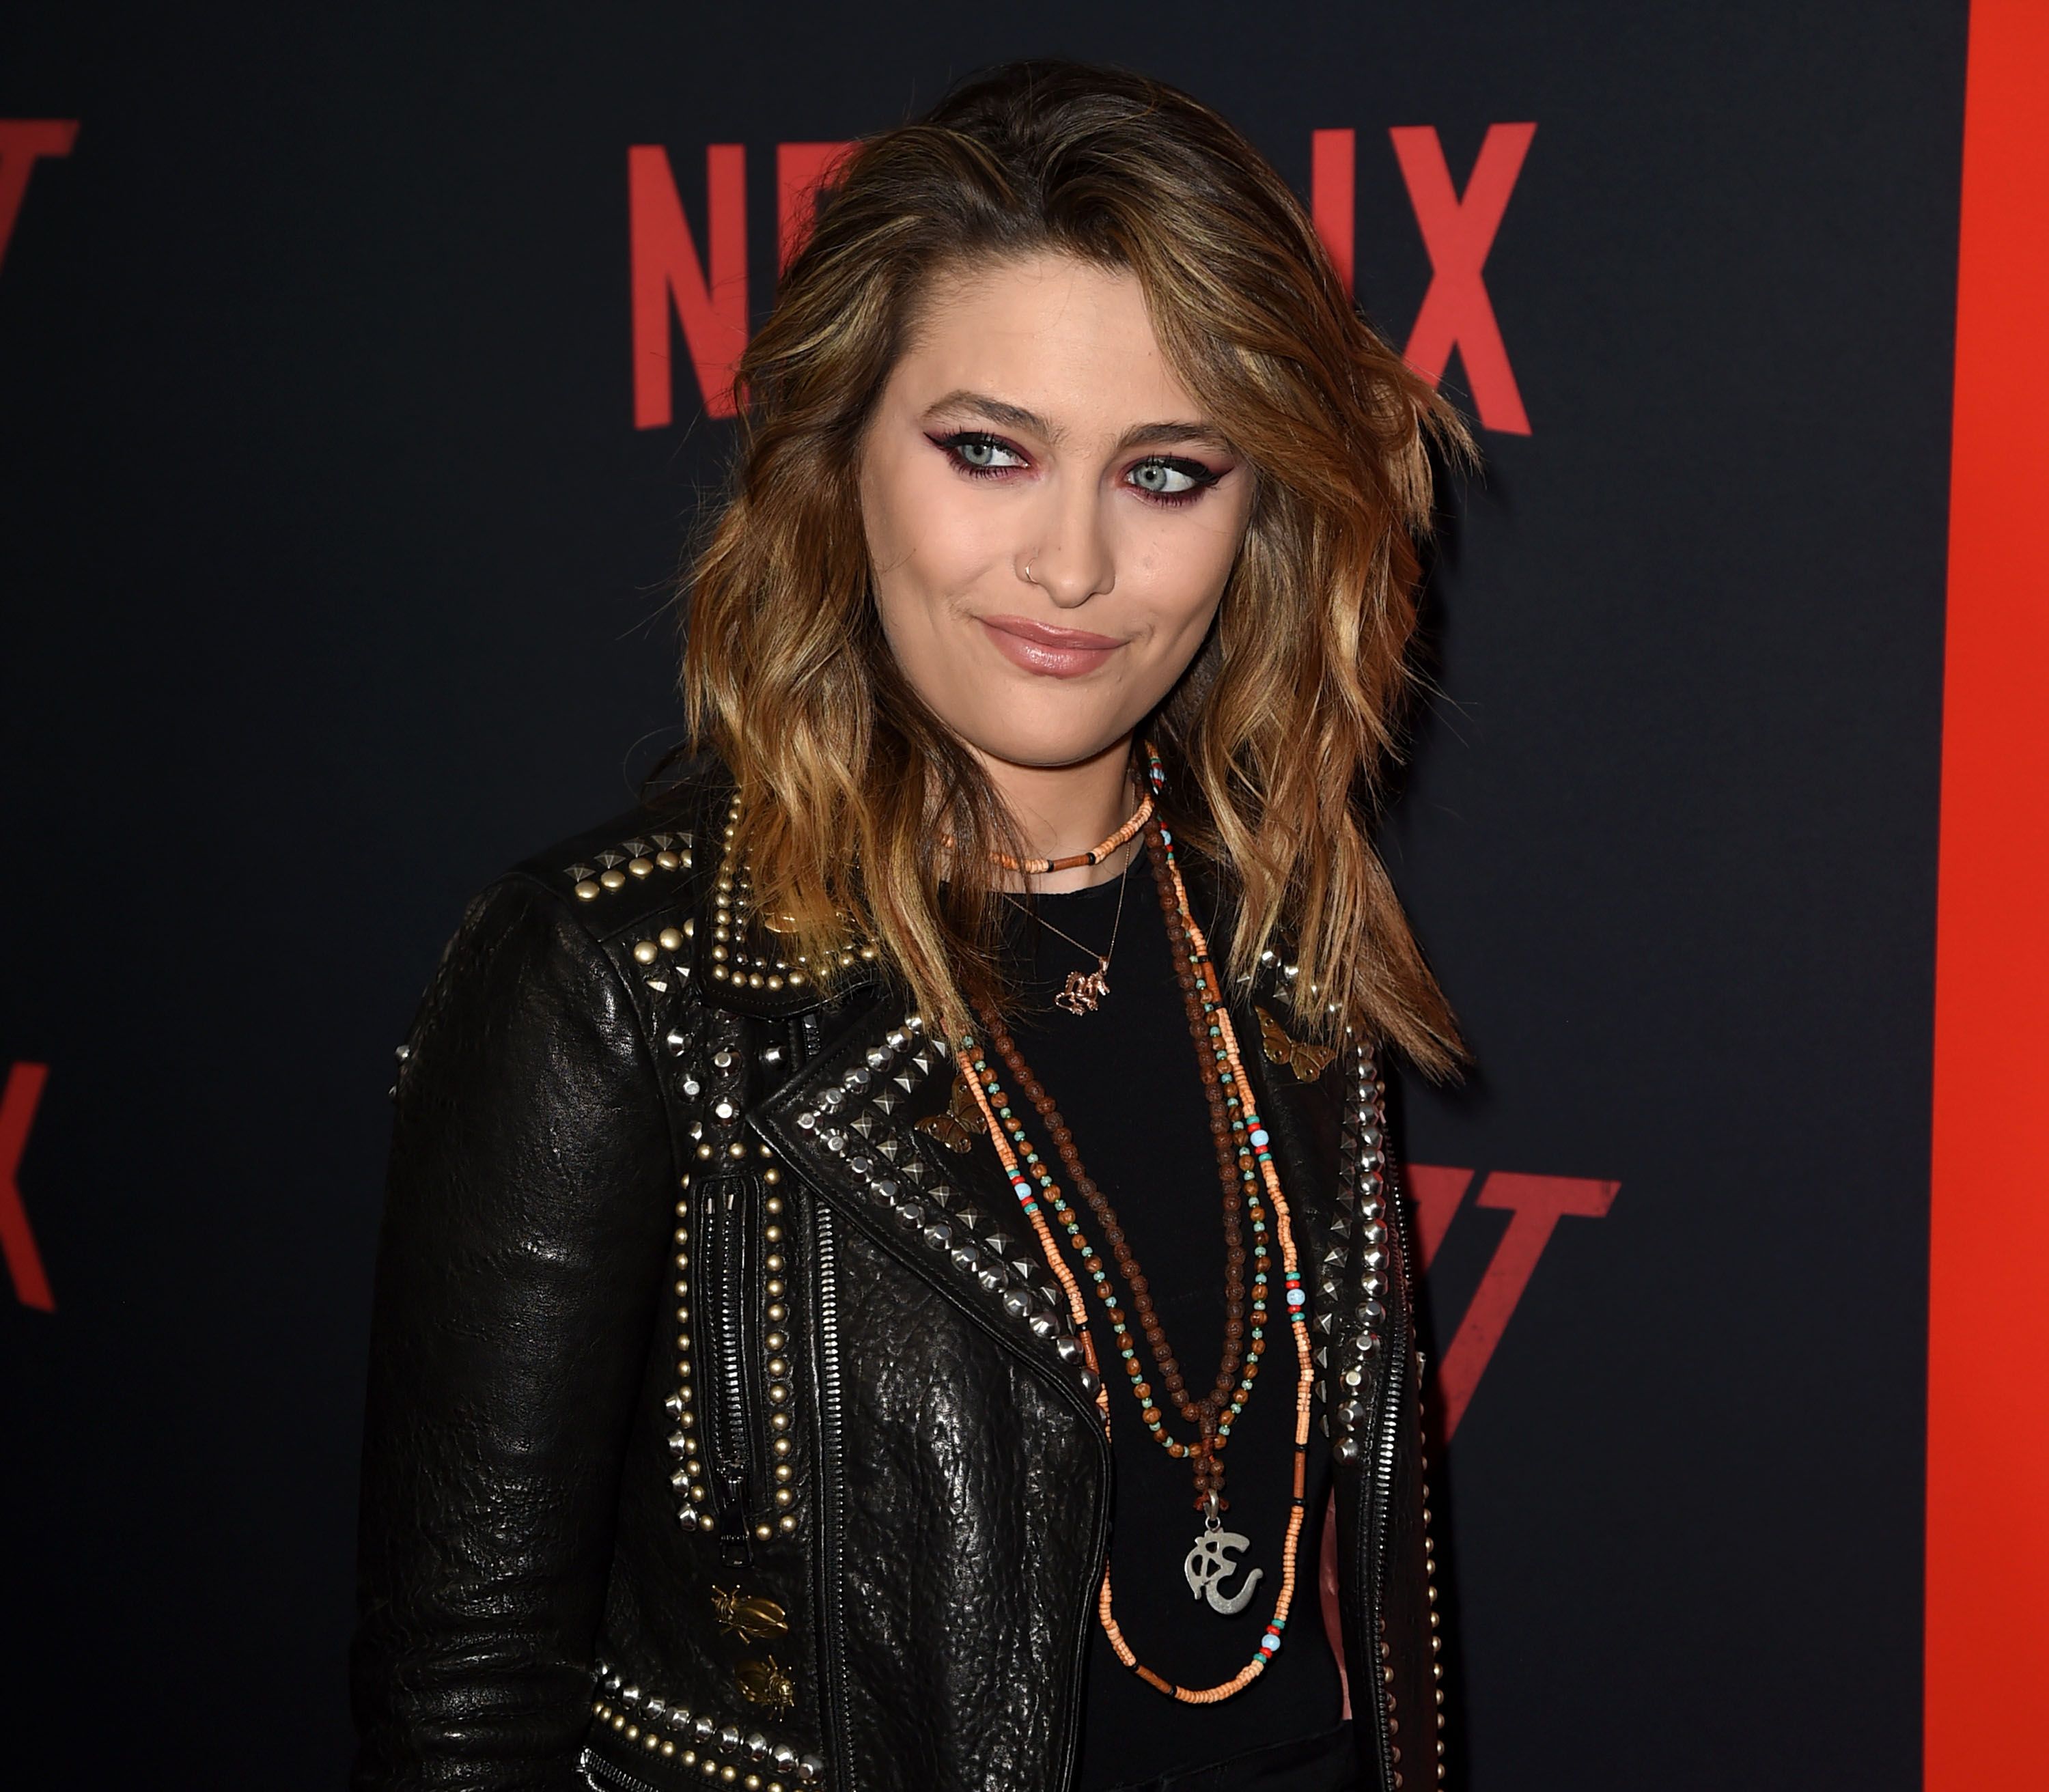 Paris Jackson at the premiere of Netflix's "The Dirt" at ArcLight Hollywood on March 18, 2019 | Photo: Getty Images